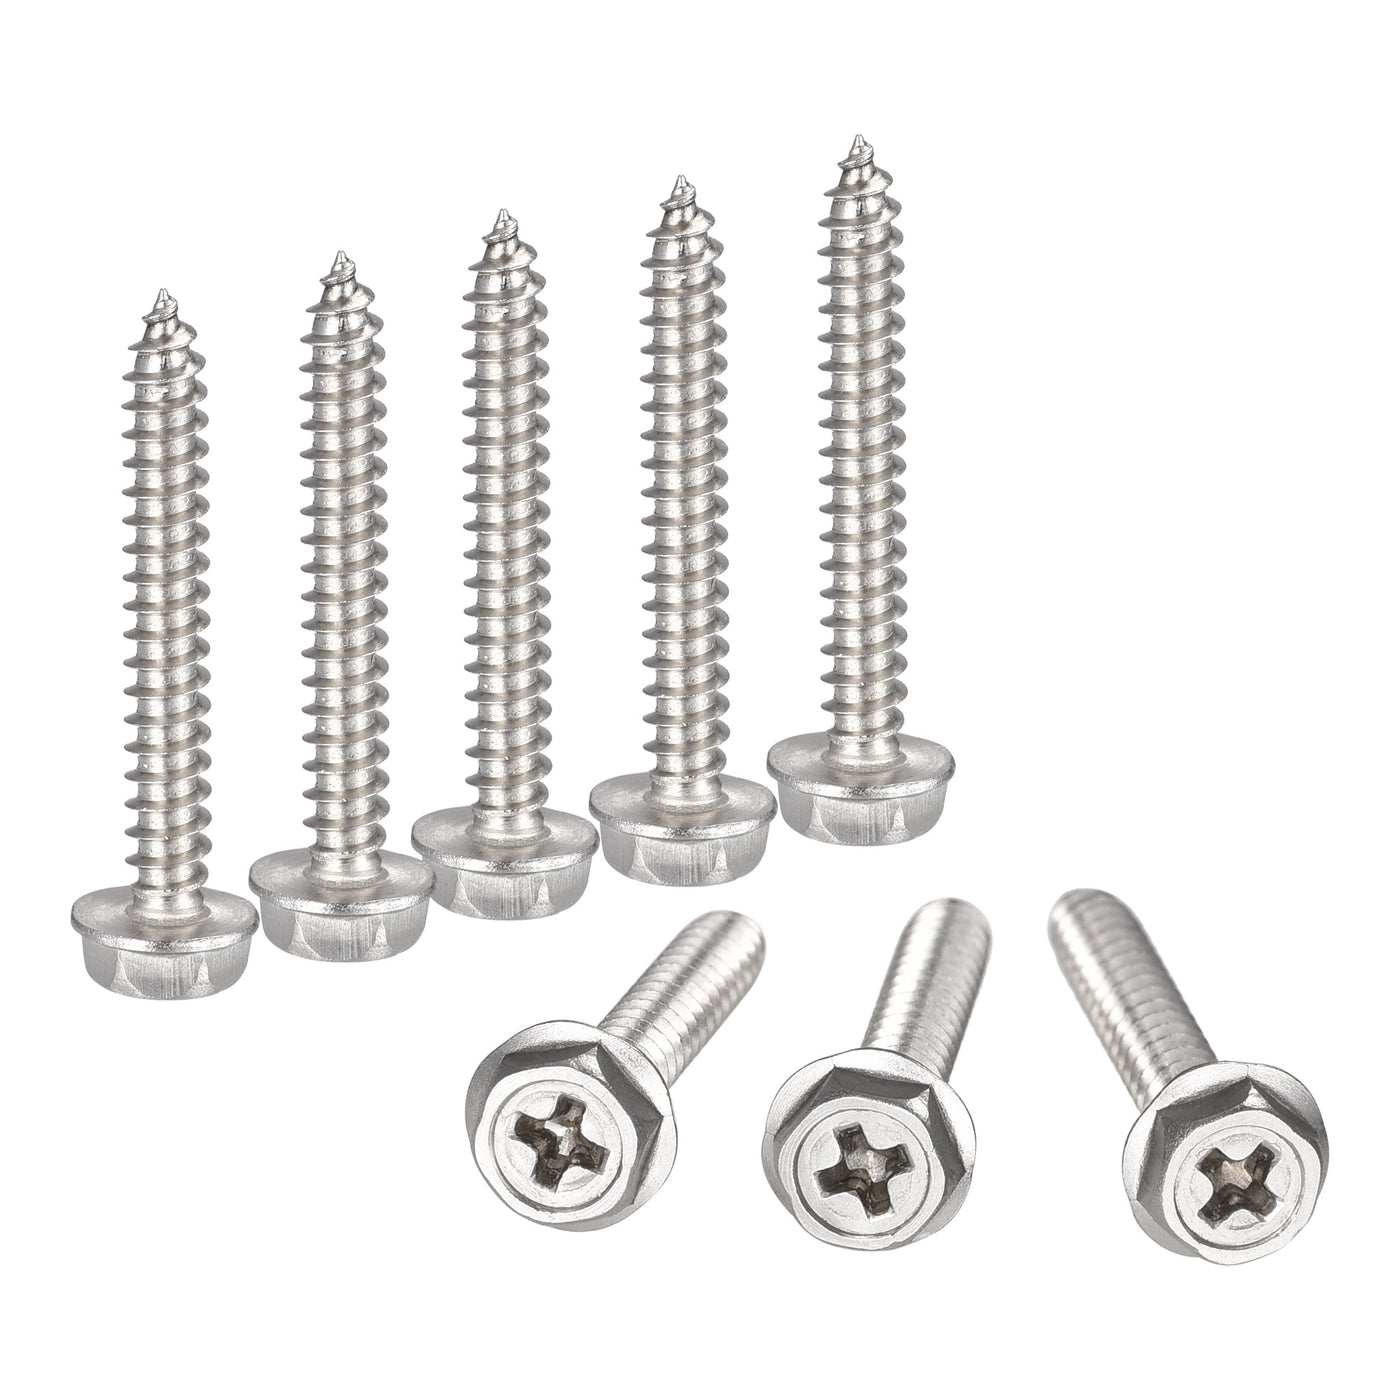 uxcell Uxcell Phillips Hex Washer Self Tapping Screws, M4 x 30mm 304 Stainless Steel Hex Flange Sheet Metal Screw 100pcs